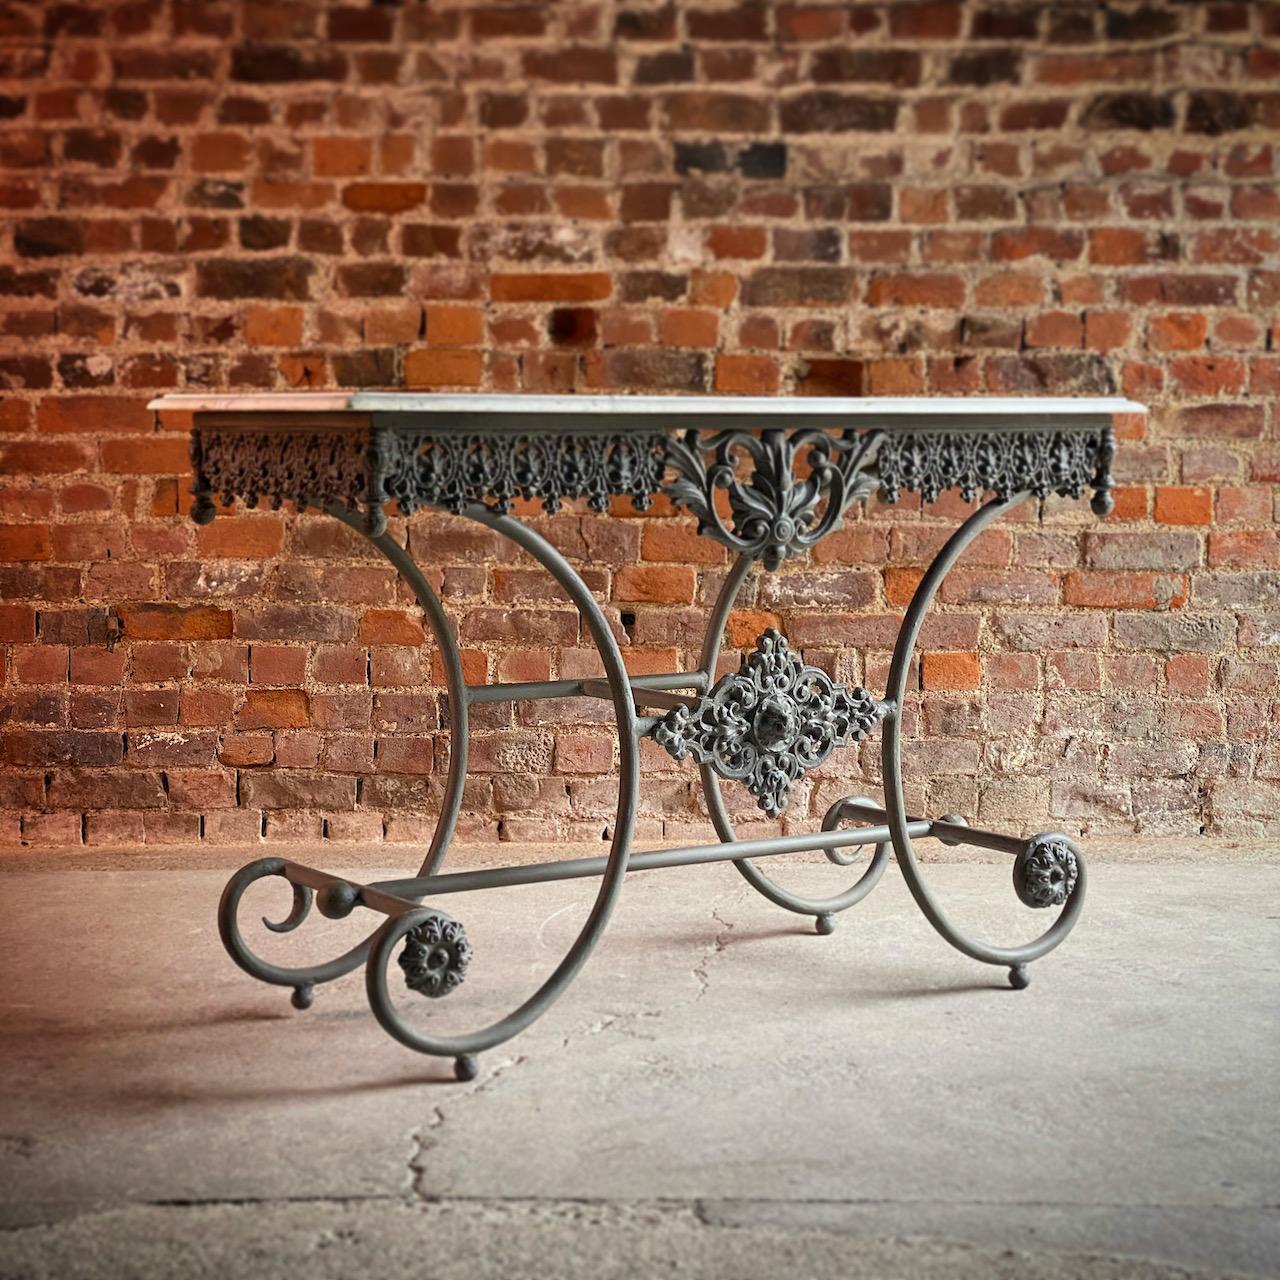 Antique French Boulangerie pastry table France circa 1890 

Magnificent and original 19th century French Boulangerie Pastry table dating to France circa 1890, the rectangular white marble top over a scrolling wrought iron base with beautiful